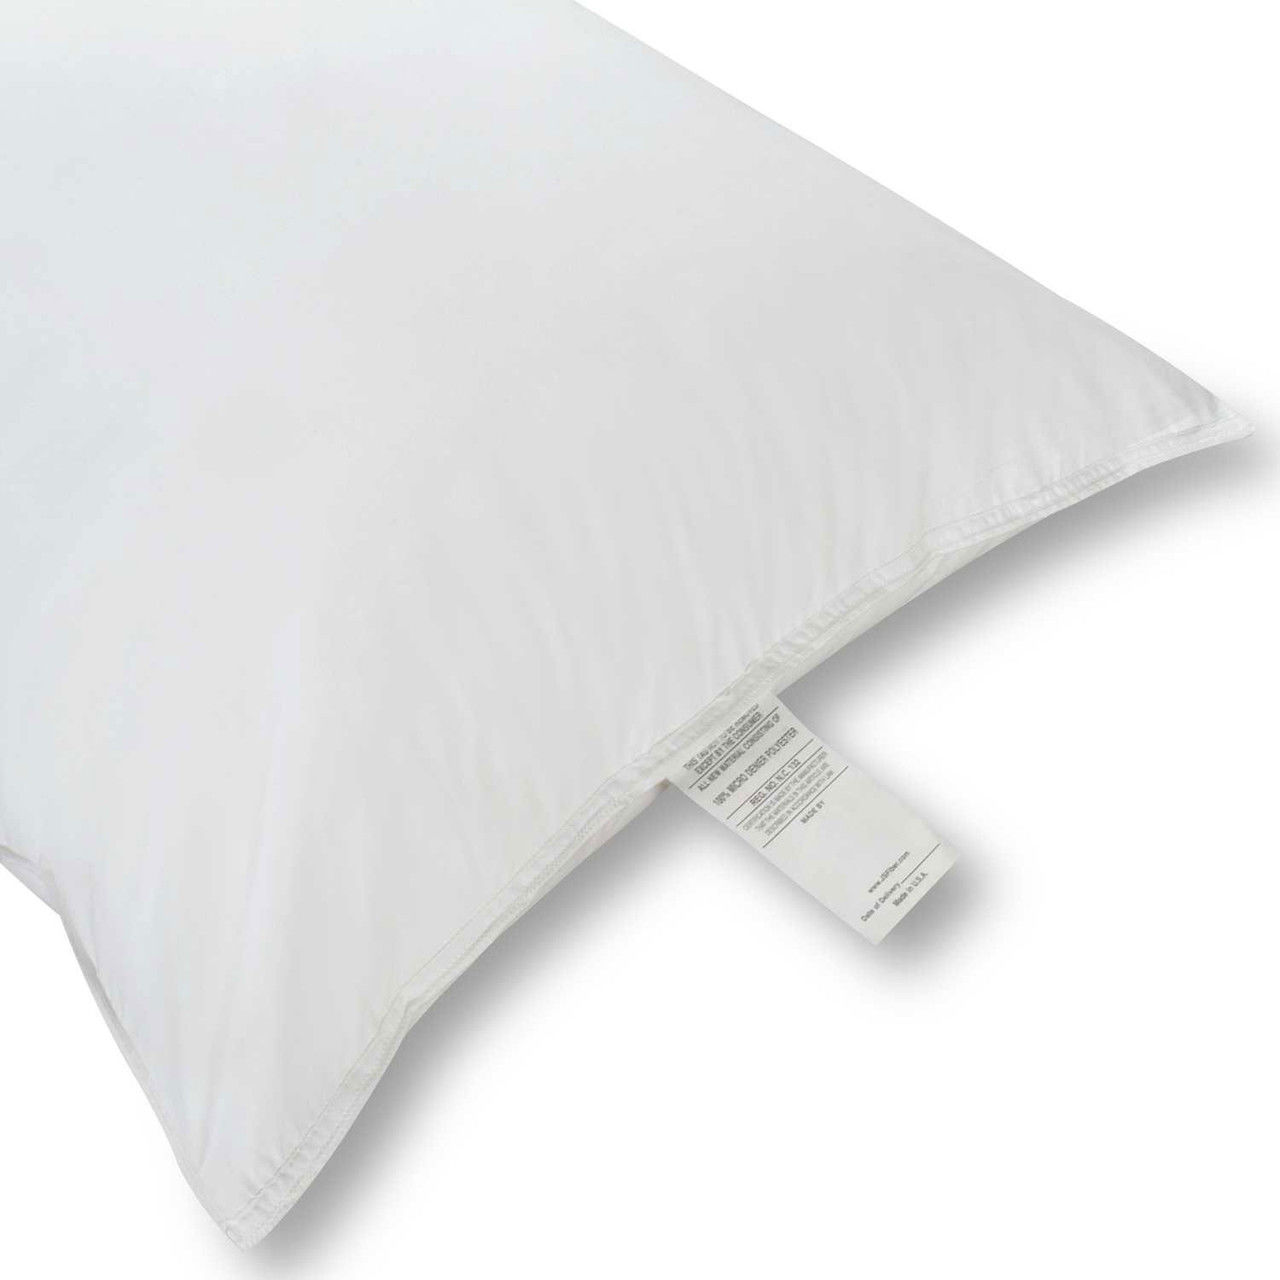 Can you tell me the materials used in the construction of the Synthetic Ultra Down Pillow?